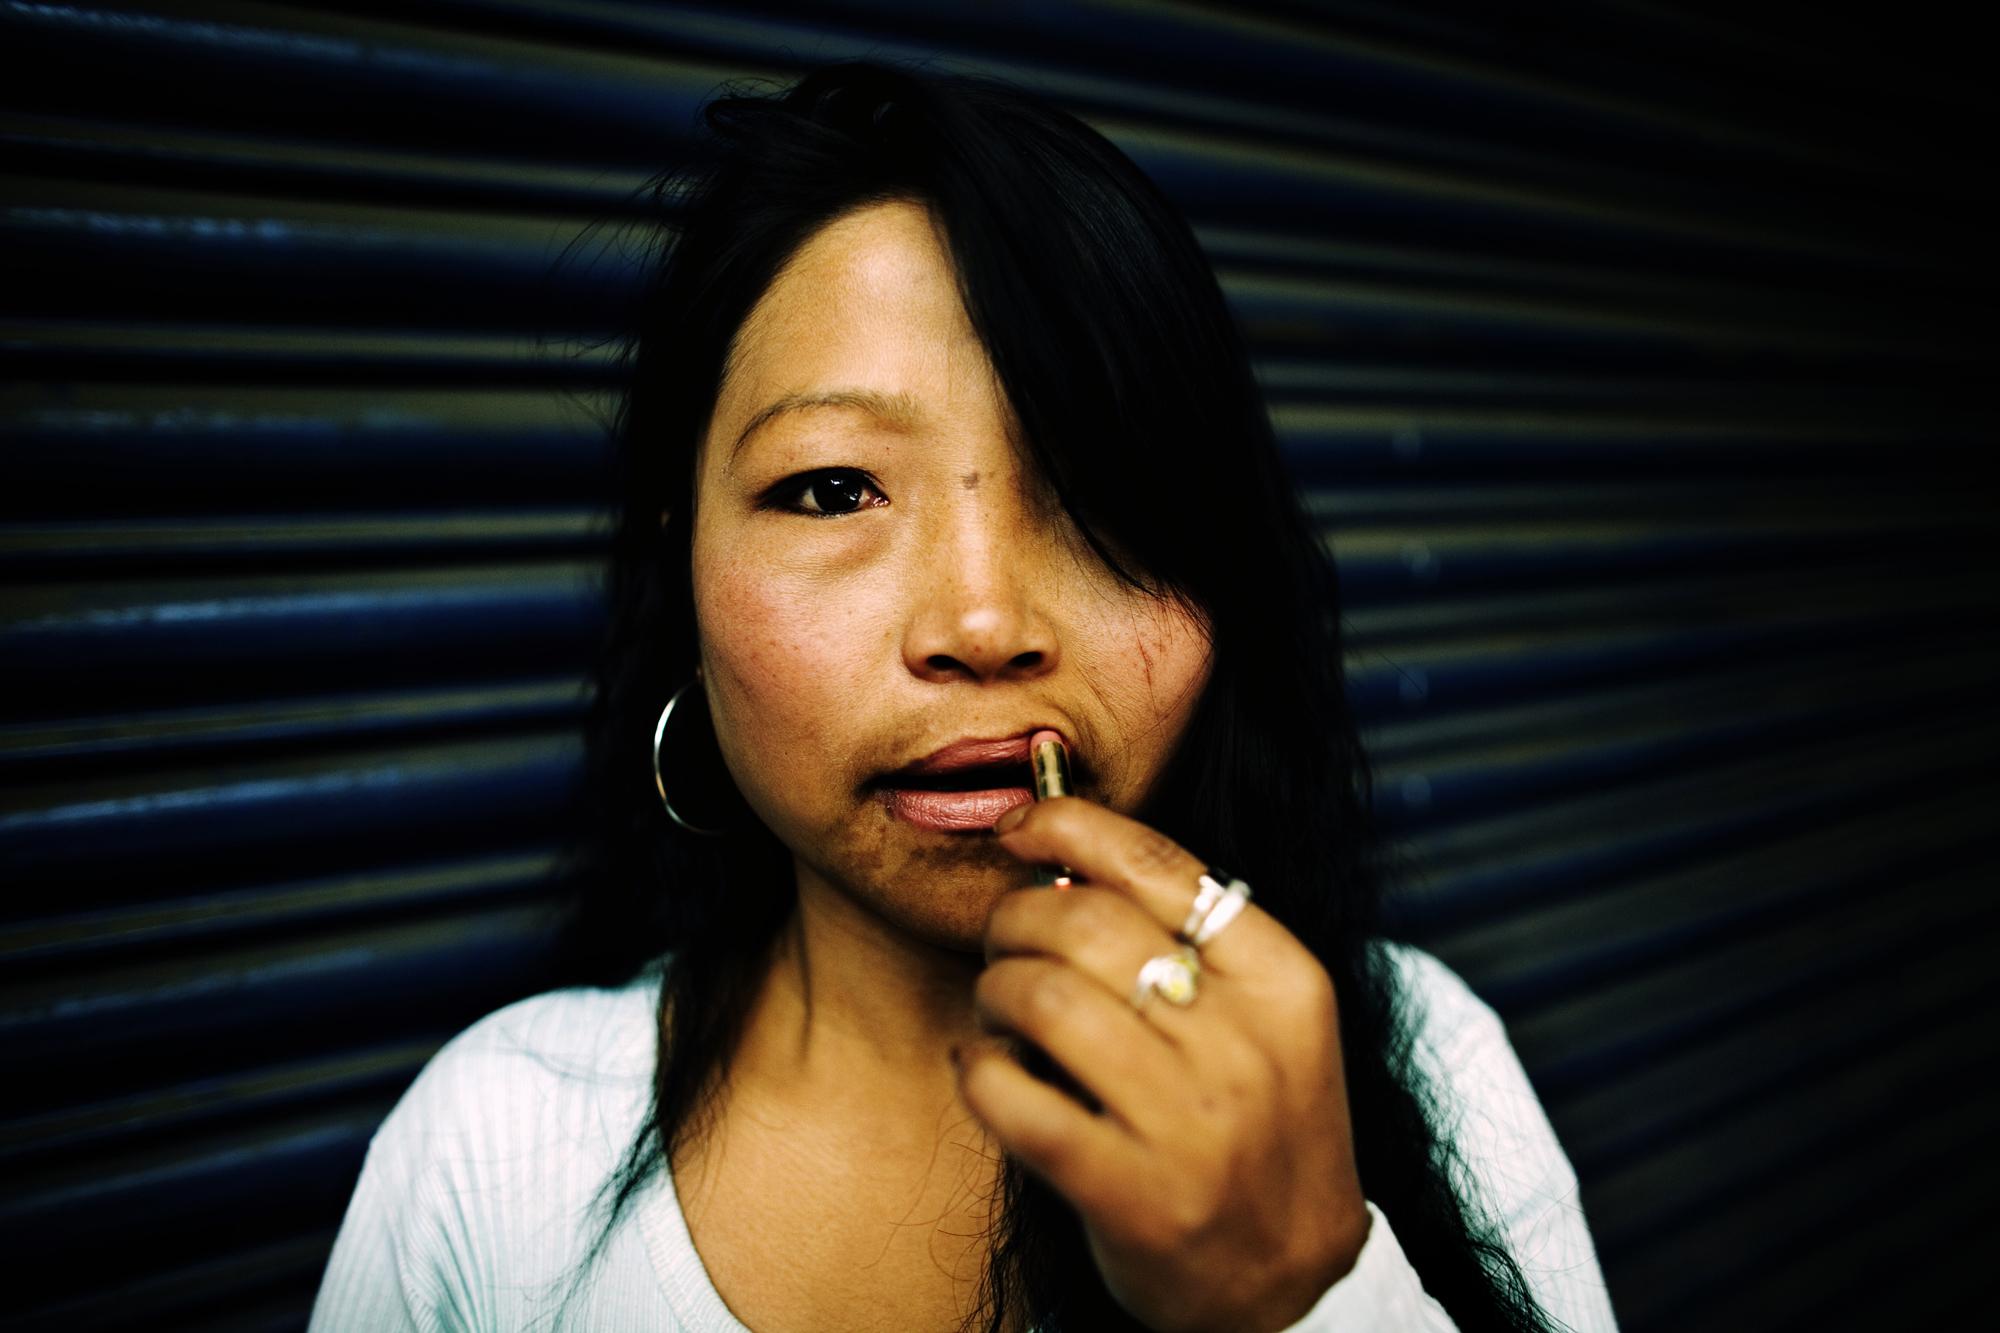 Injecting death - INDIA Shillong, Meghalaya A portrait of a recovering drug...